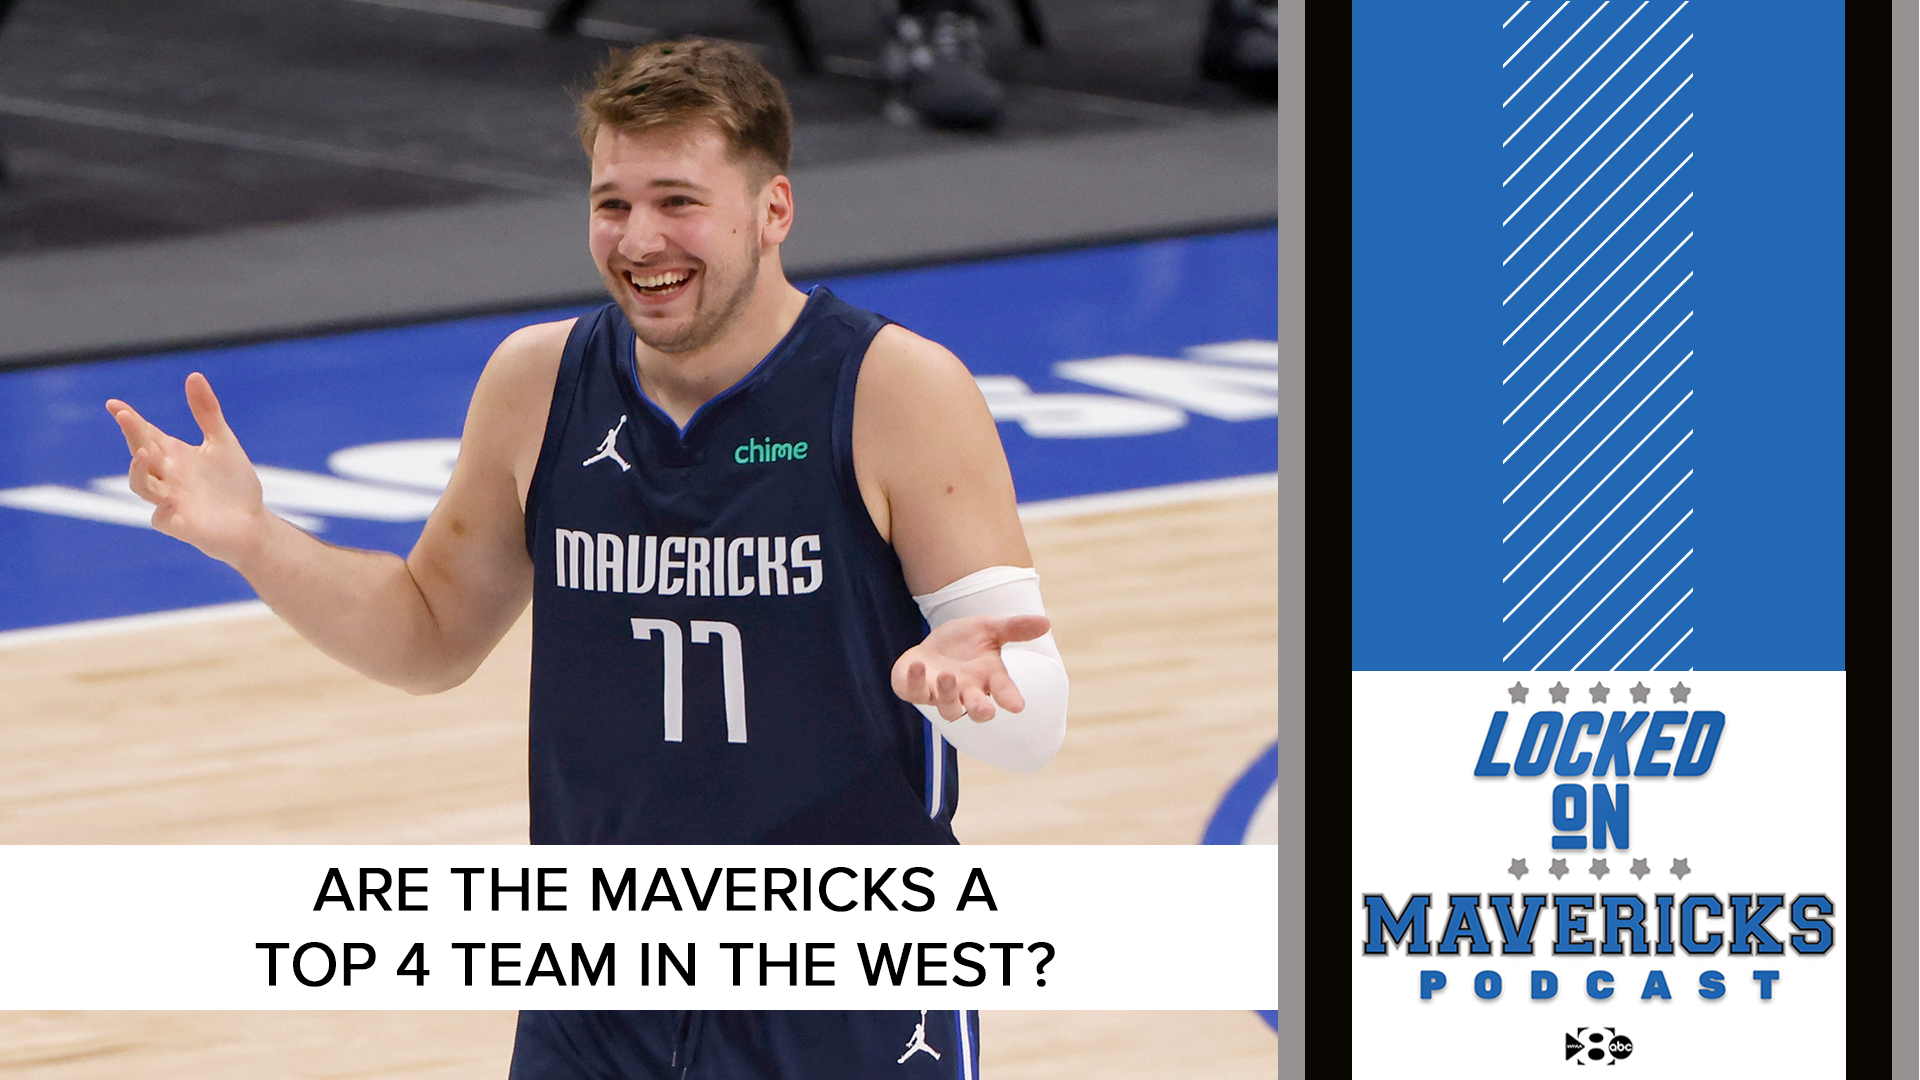 How can the Mavs break into the Top 4 in the West? @NickVanExit and @IsaacLHarris breakdown the Western Conference going into next season.